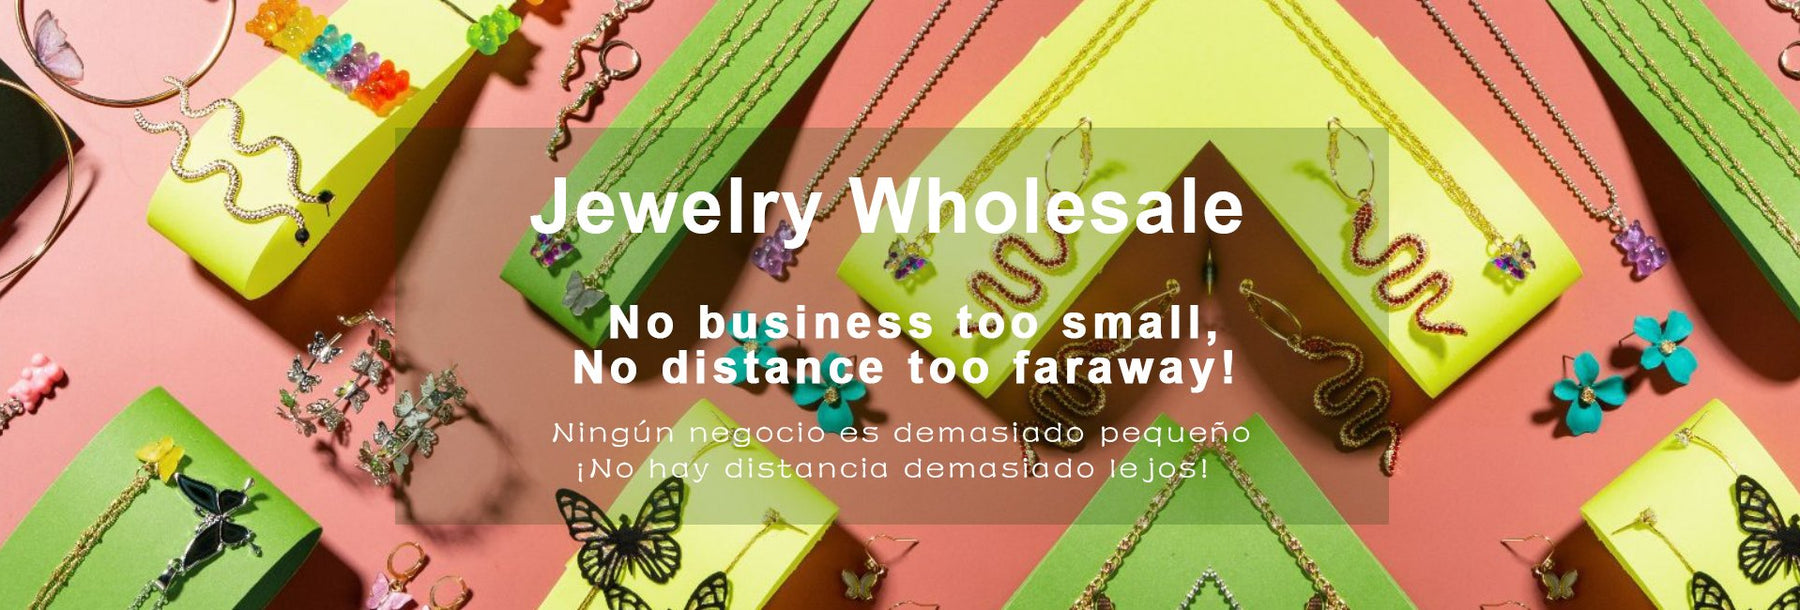 How to distinguish the materials of jewelry?